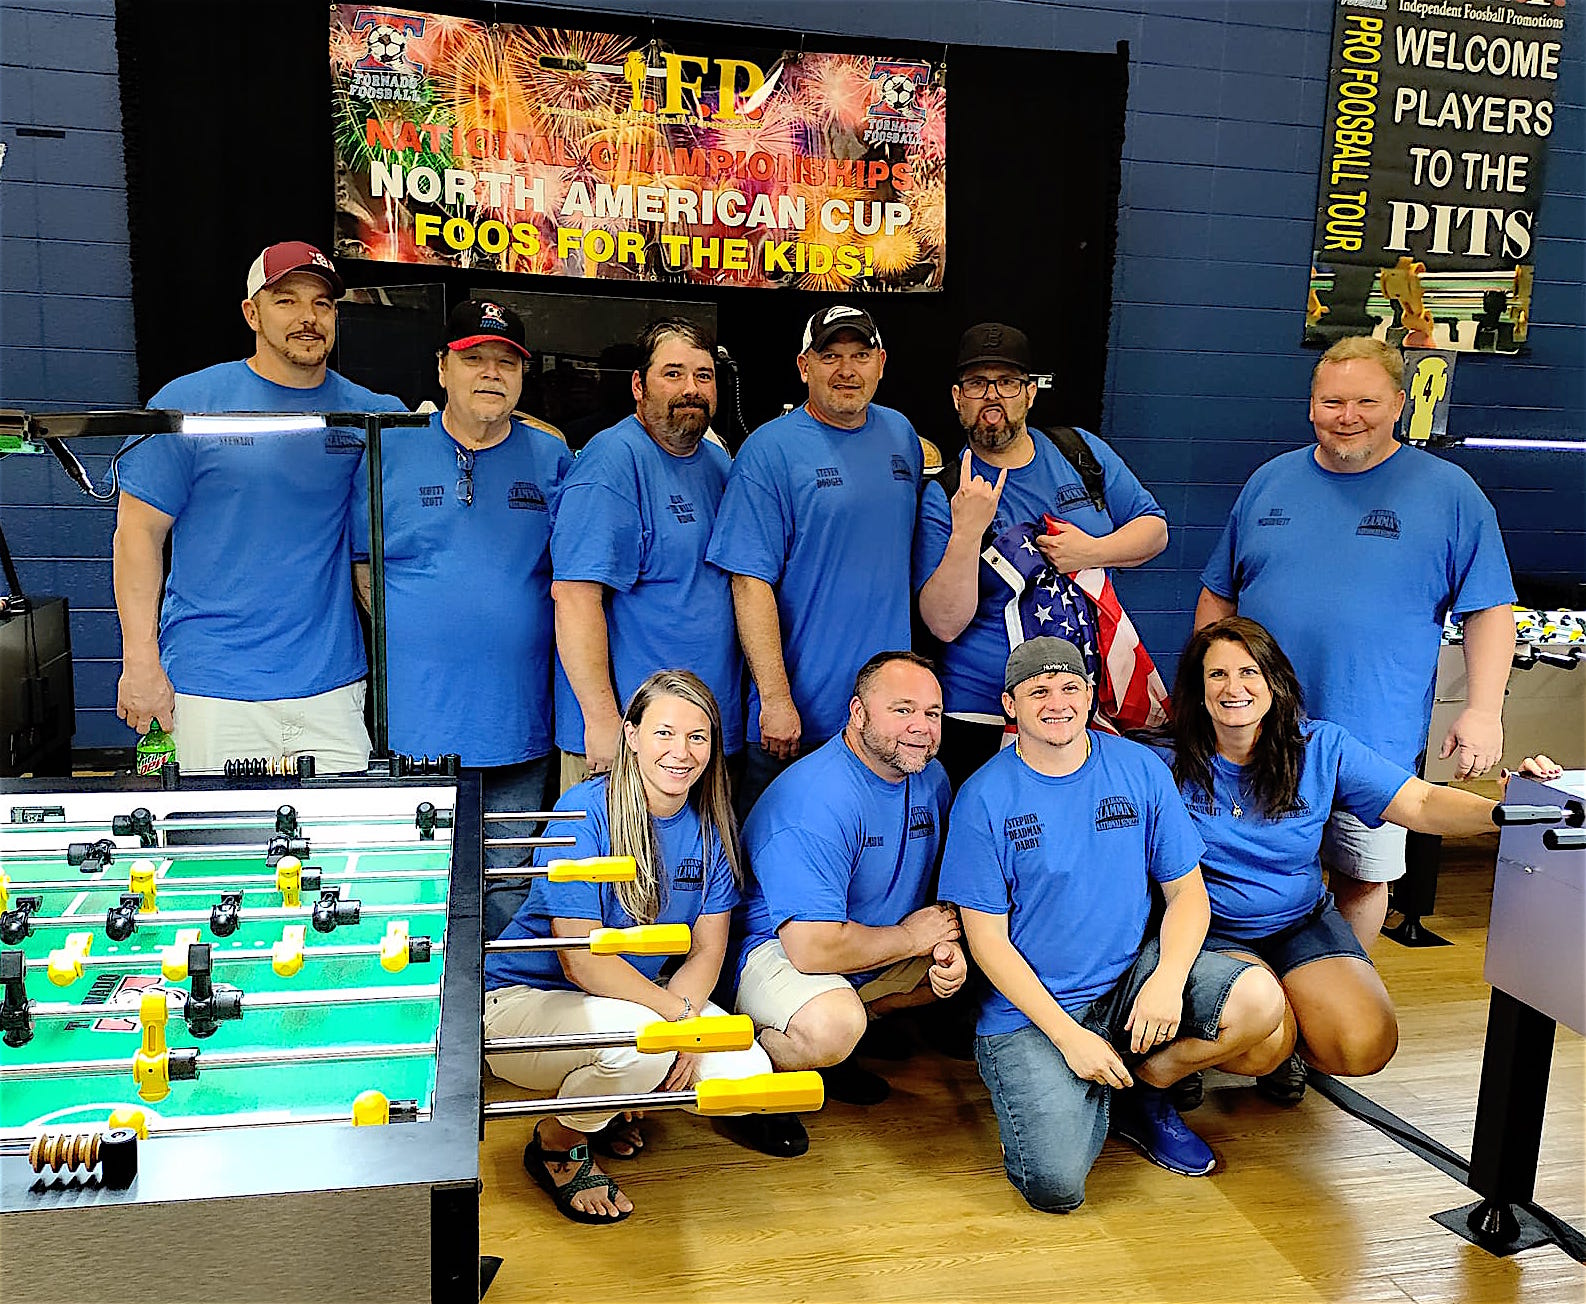 This group of Alabama foosball players are representing the state in team competition at the 2022 North American Cup Championships.